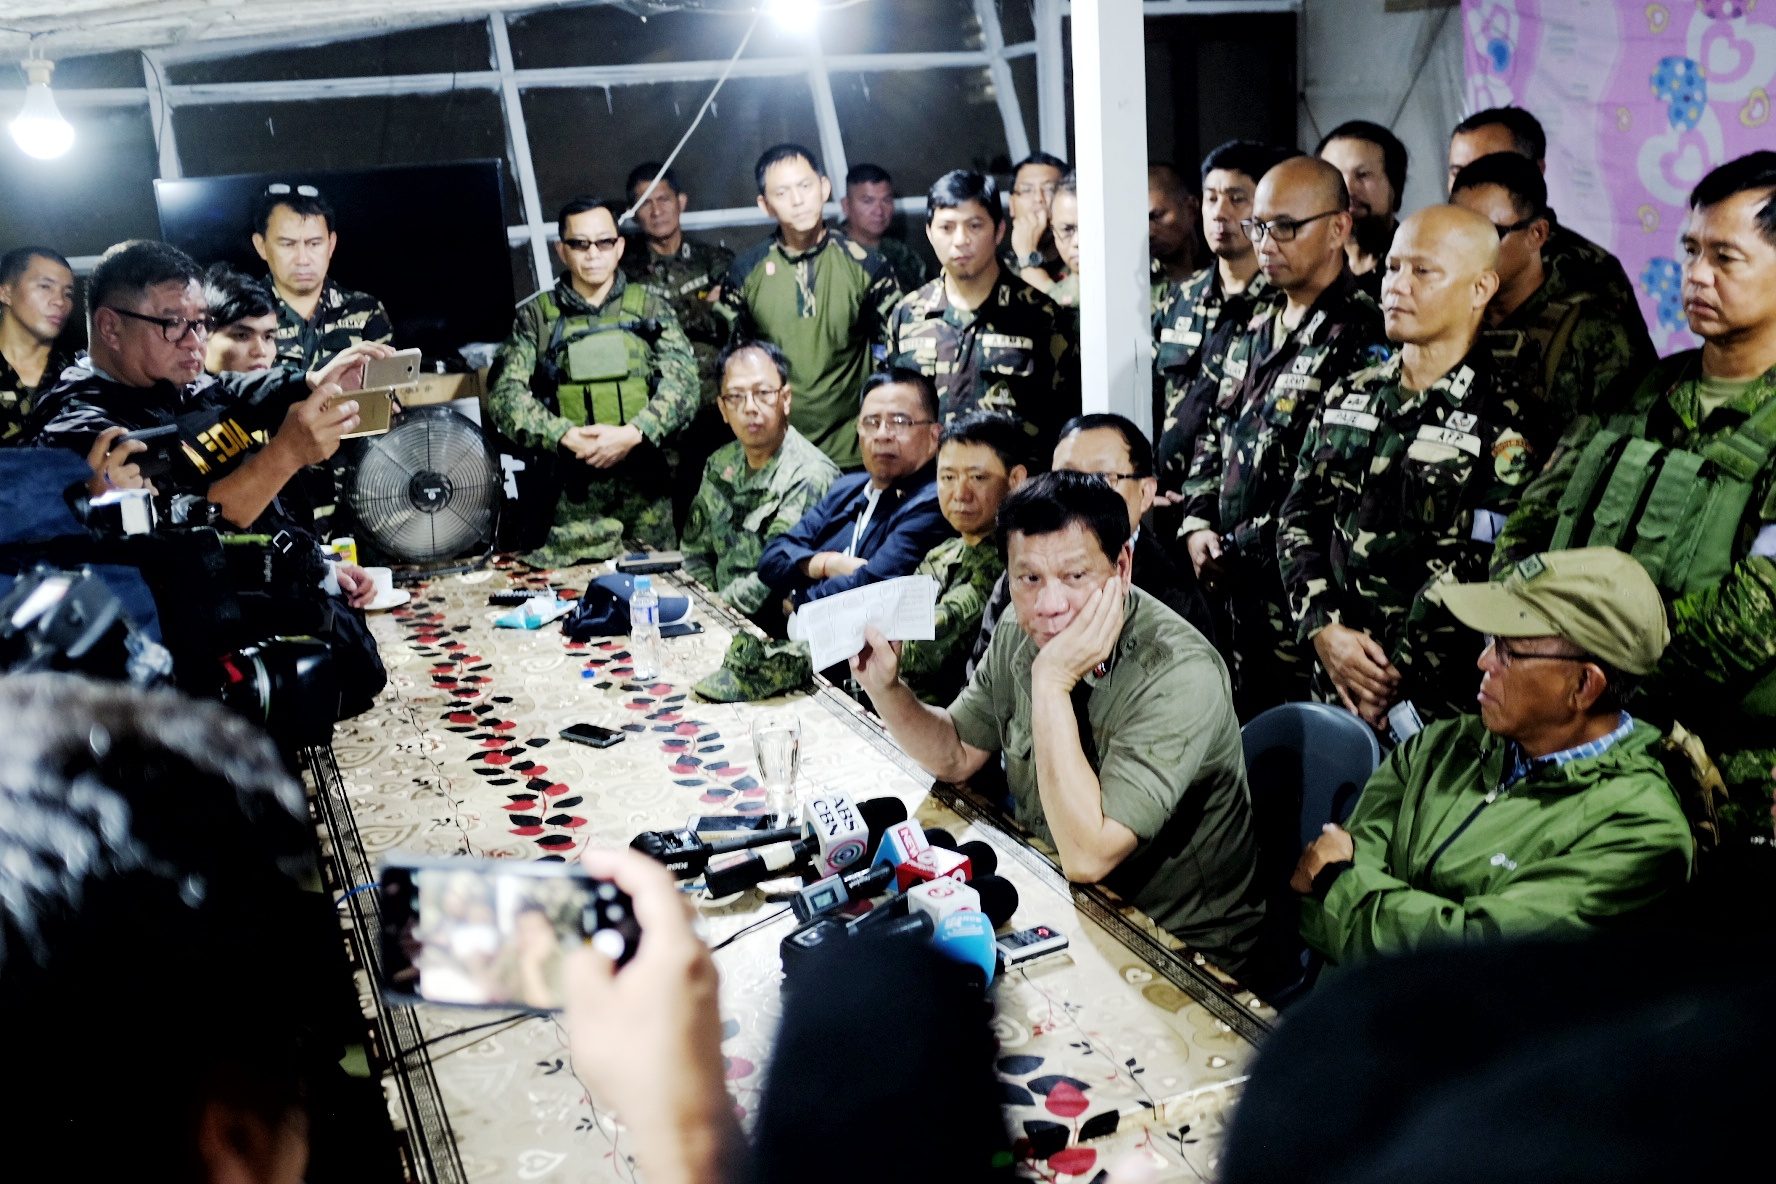 5TH VISIT. President Rodrigo Duterte, along with top military officials, visits Camp Ranao in Marawi City on September 21, 2017. Photo by Bobby Lagsa/Rappler   